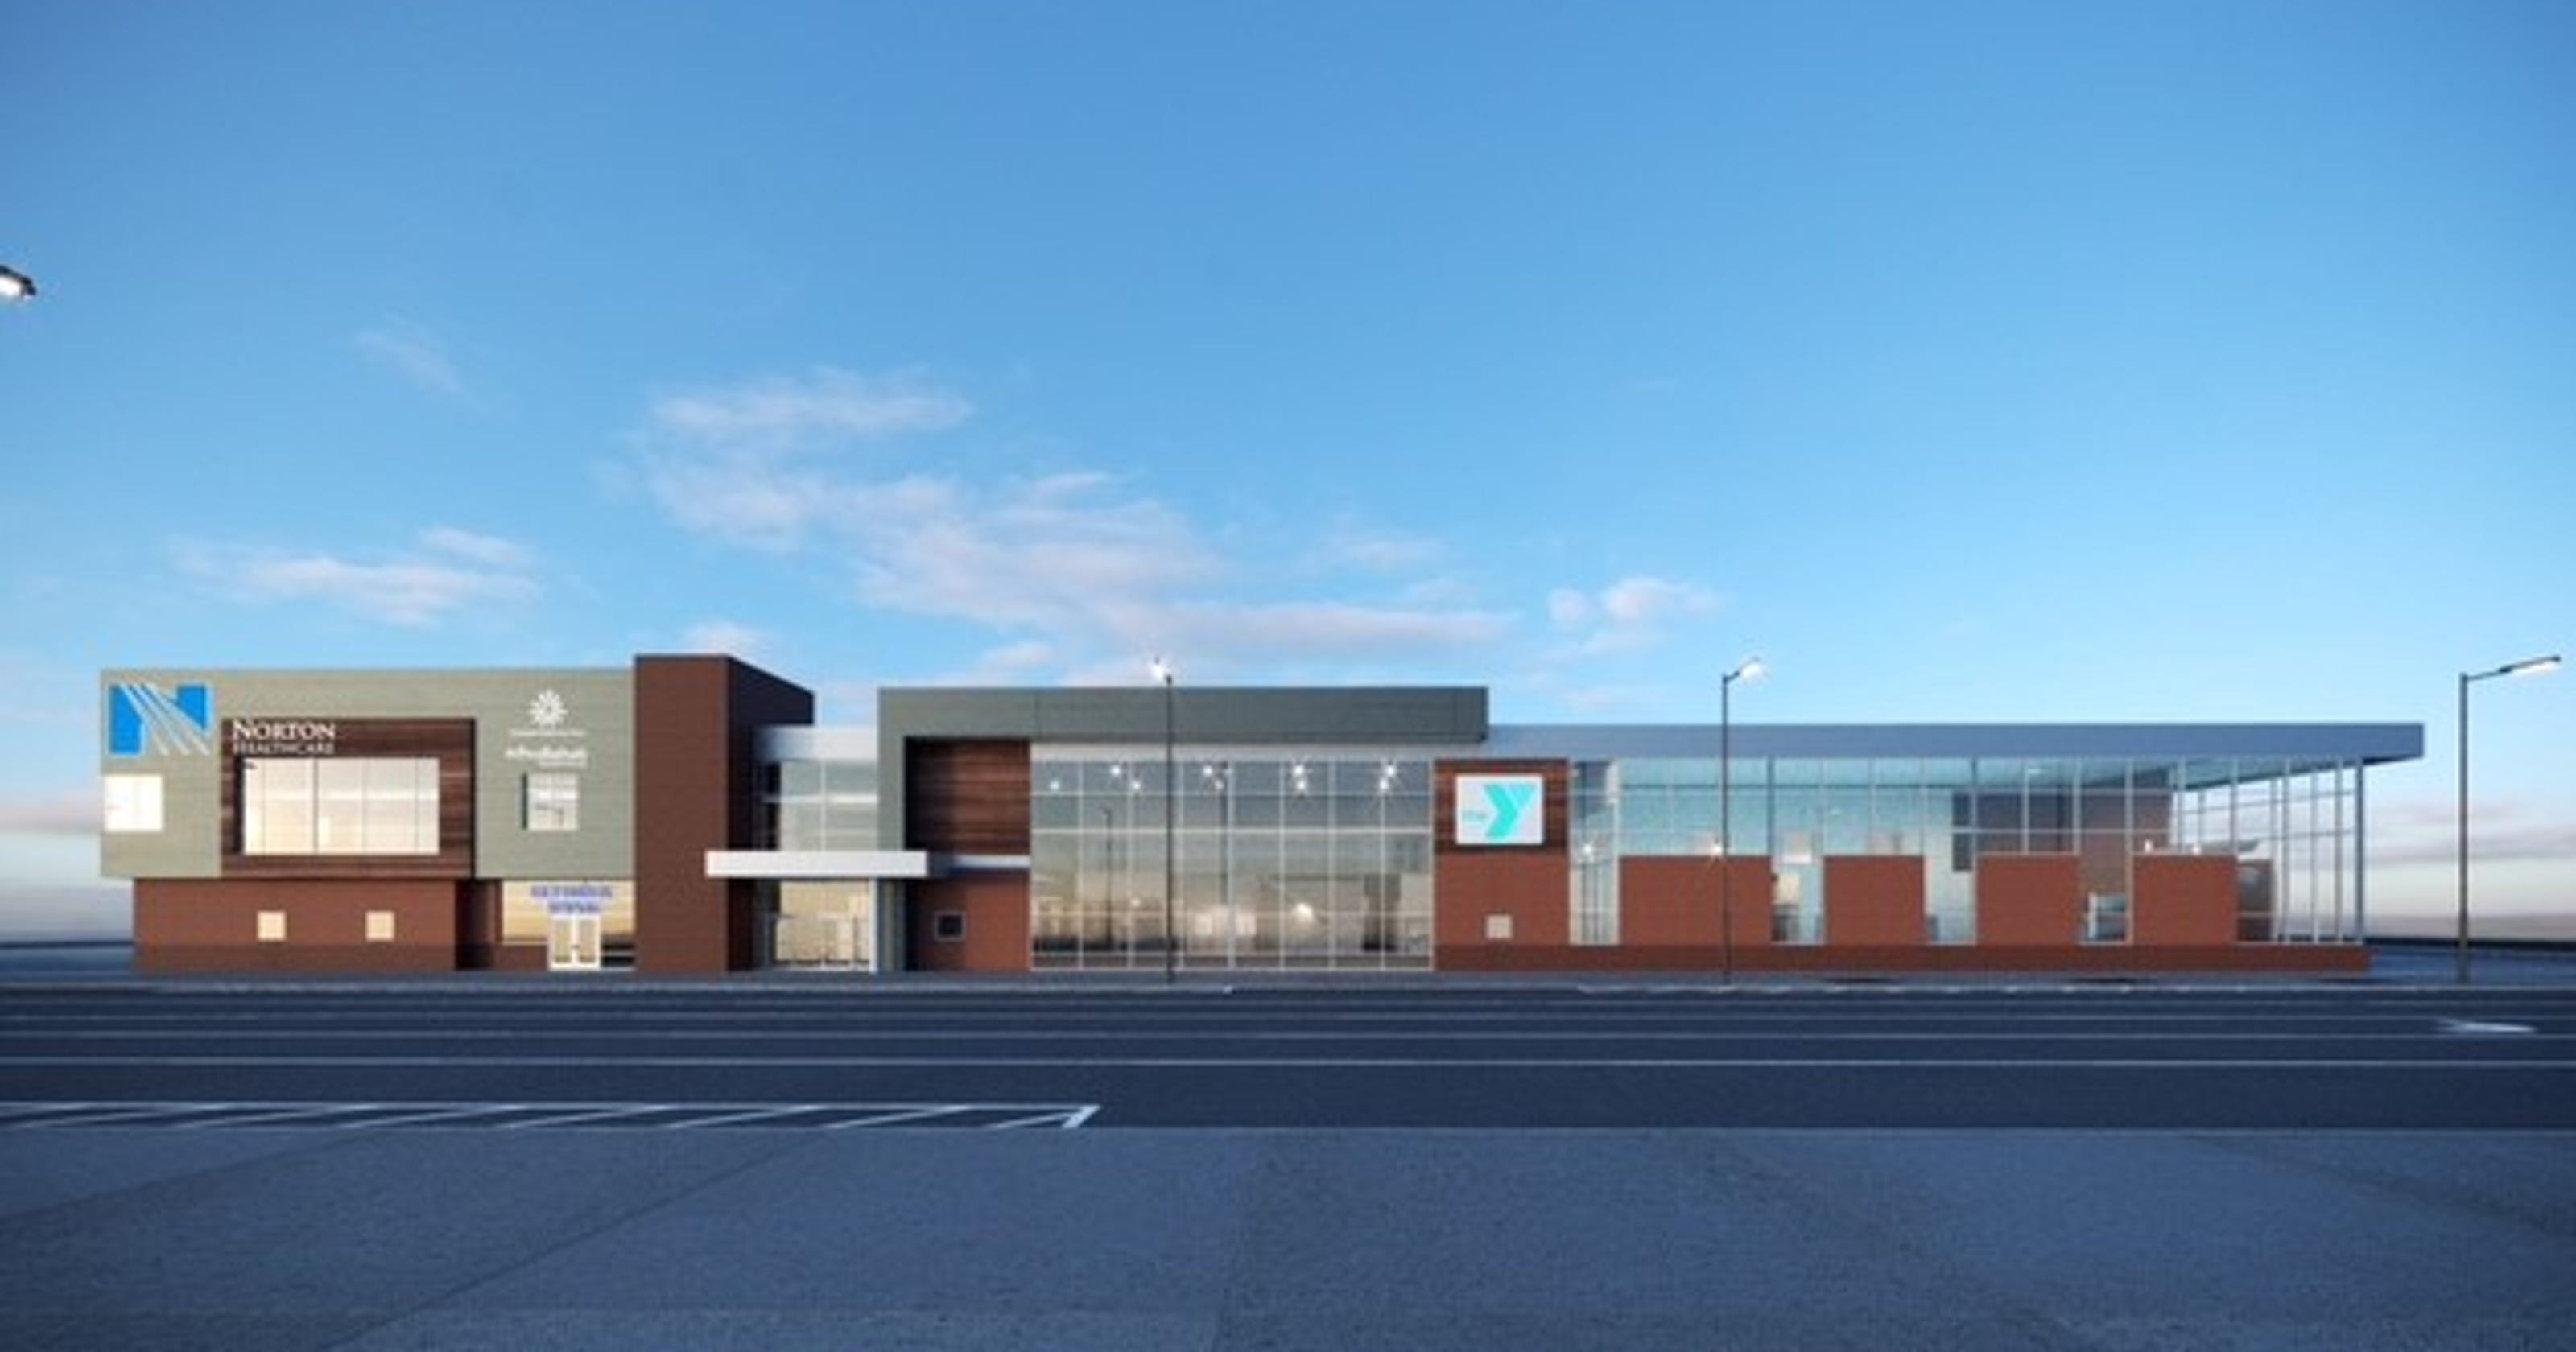 Construction will soon begin on the West End Louisville YMCA facility